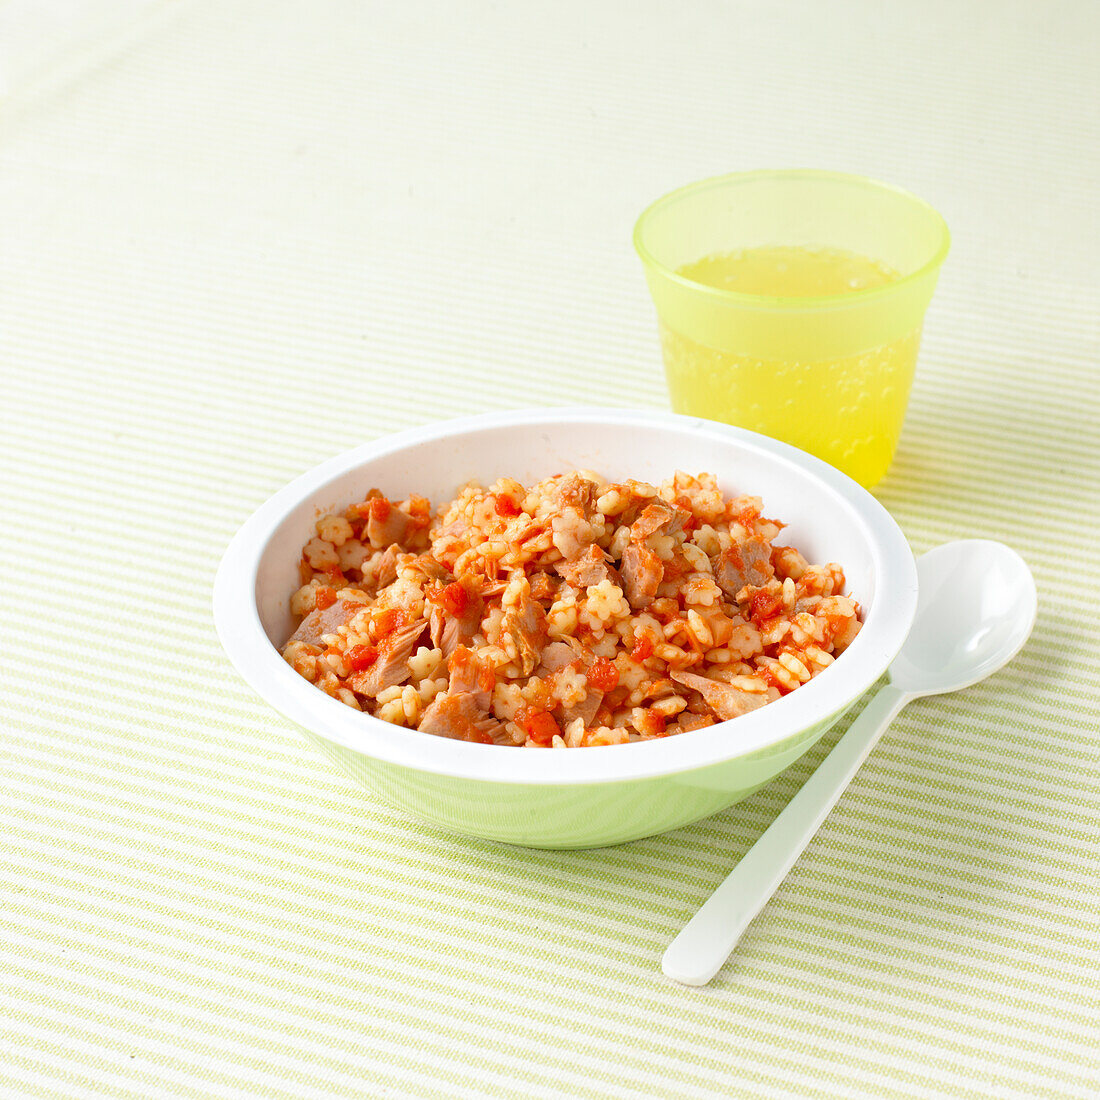 Tomato and tuna pasta topped with cheese